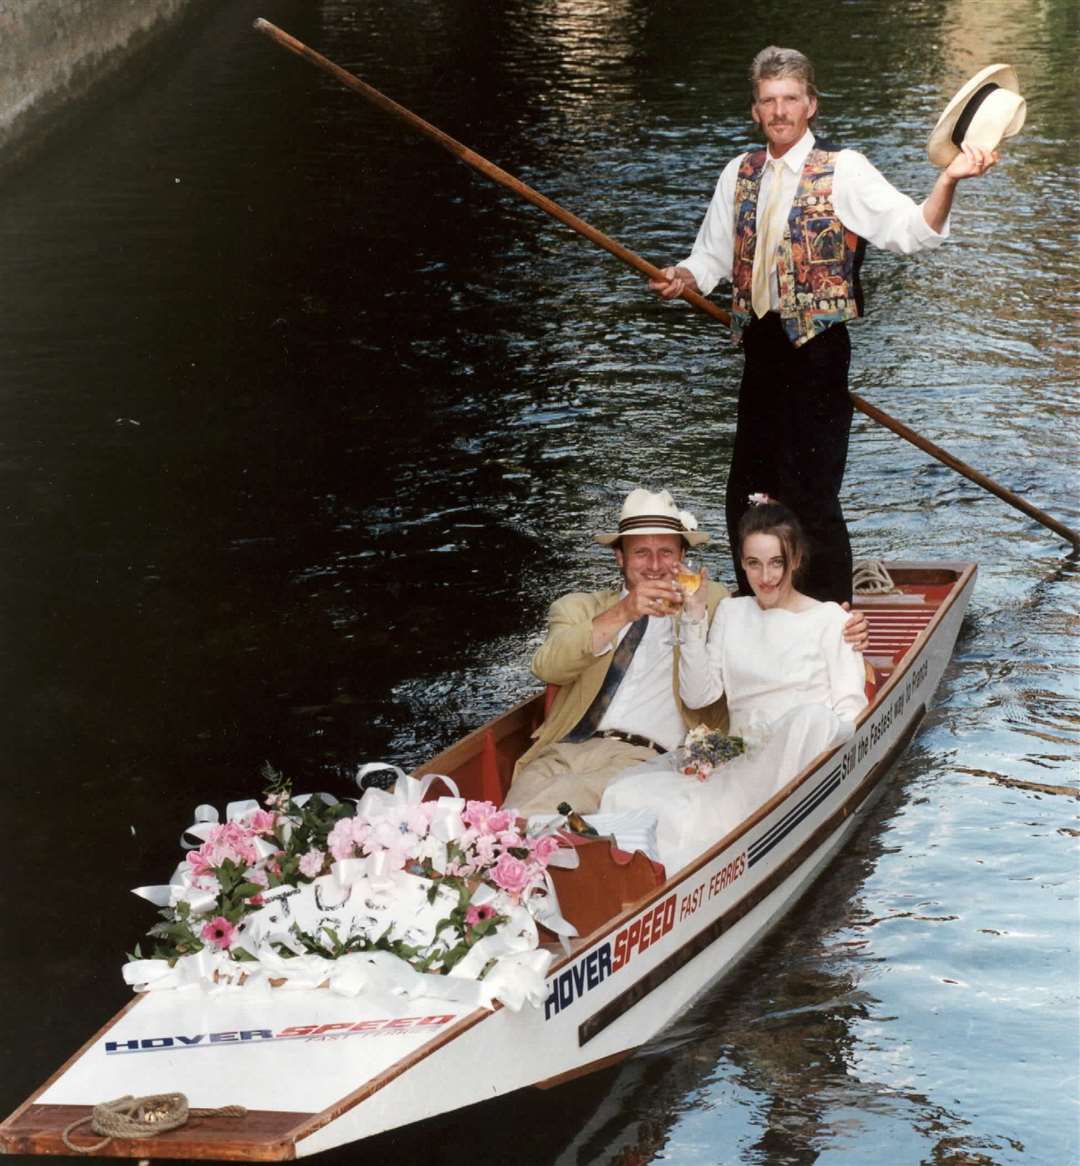 A wedding day trip on the River Stour in Canterbury in 1995